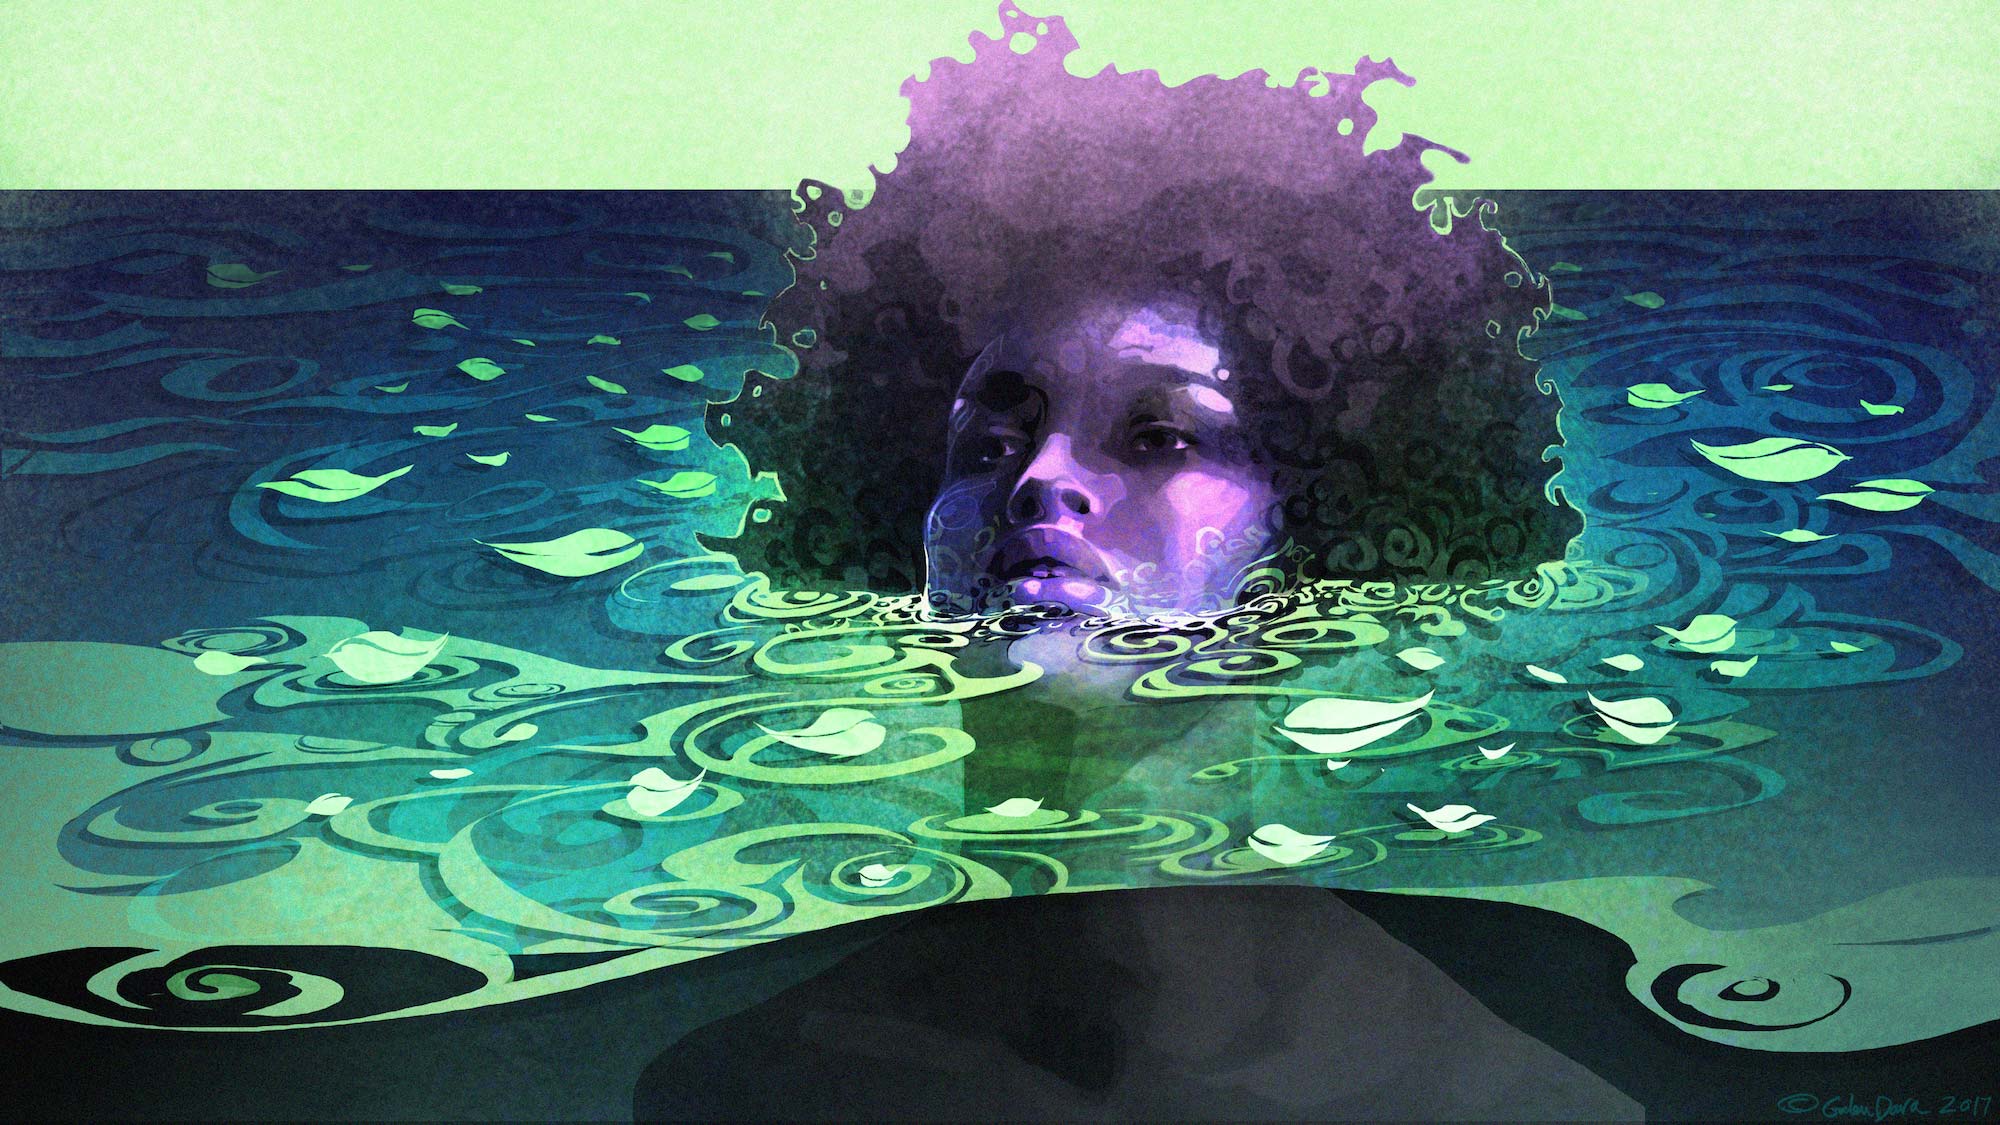 A young person with an afro is sitting in water up to their chin.